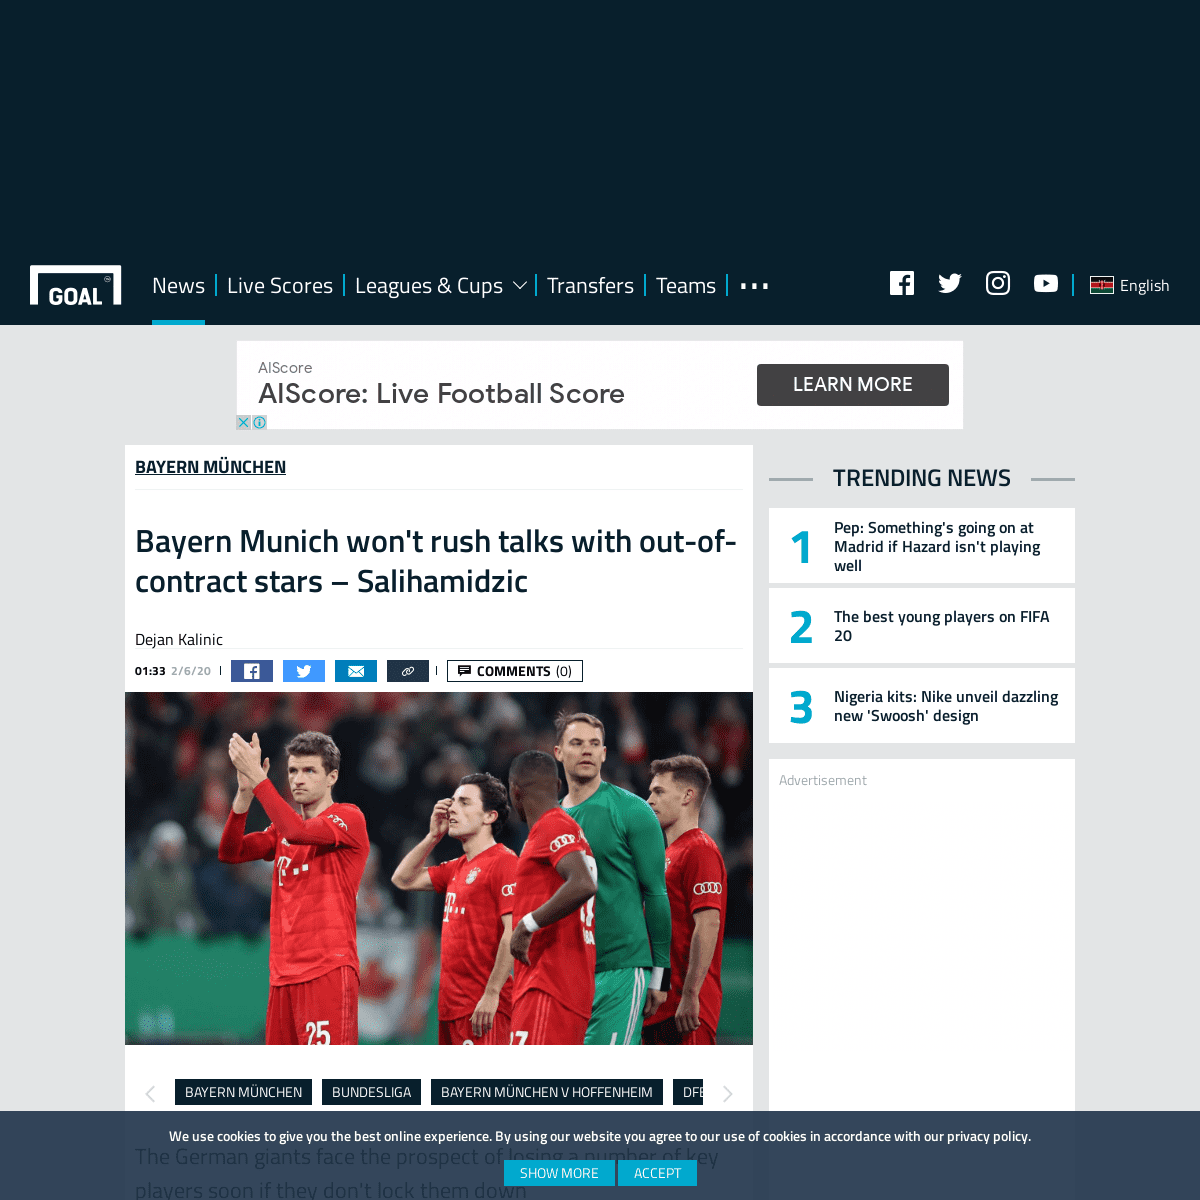 A complete backup of www.goal.com/en-ke/news/bayern-munich-wont-rush-talks-with-out-of-contract-stars/1vljy2rr3d4ni10939cxqtqg66